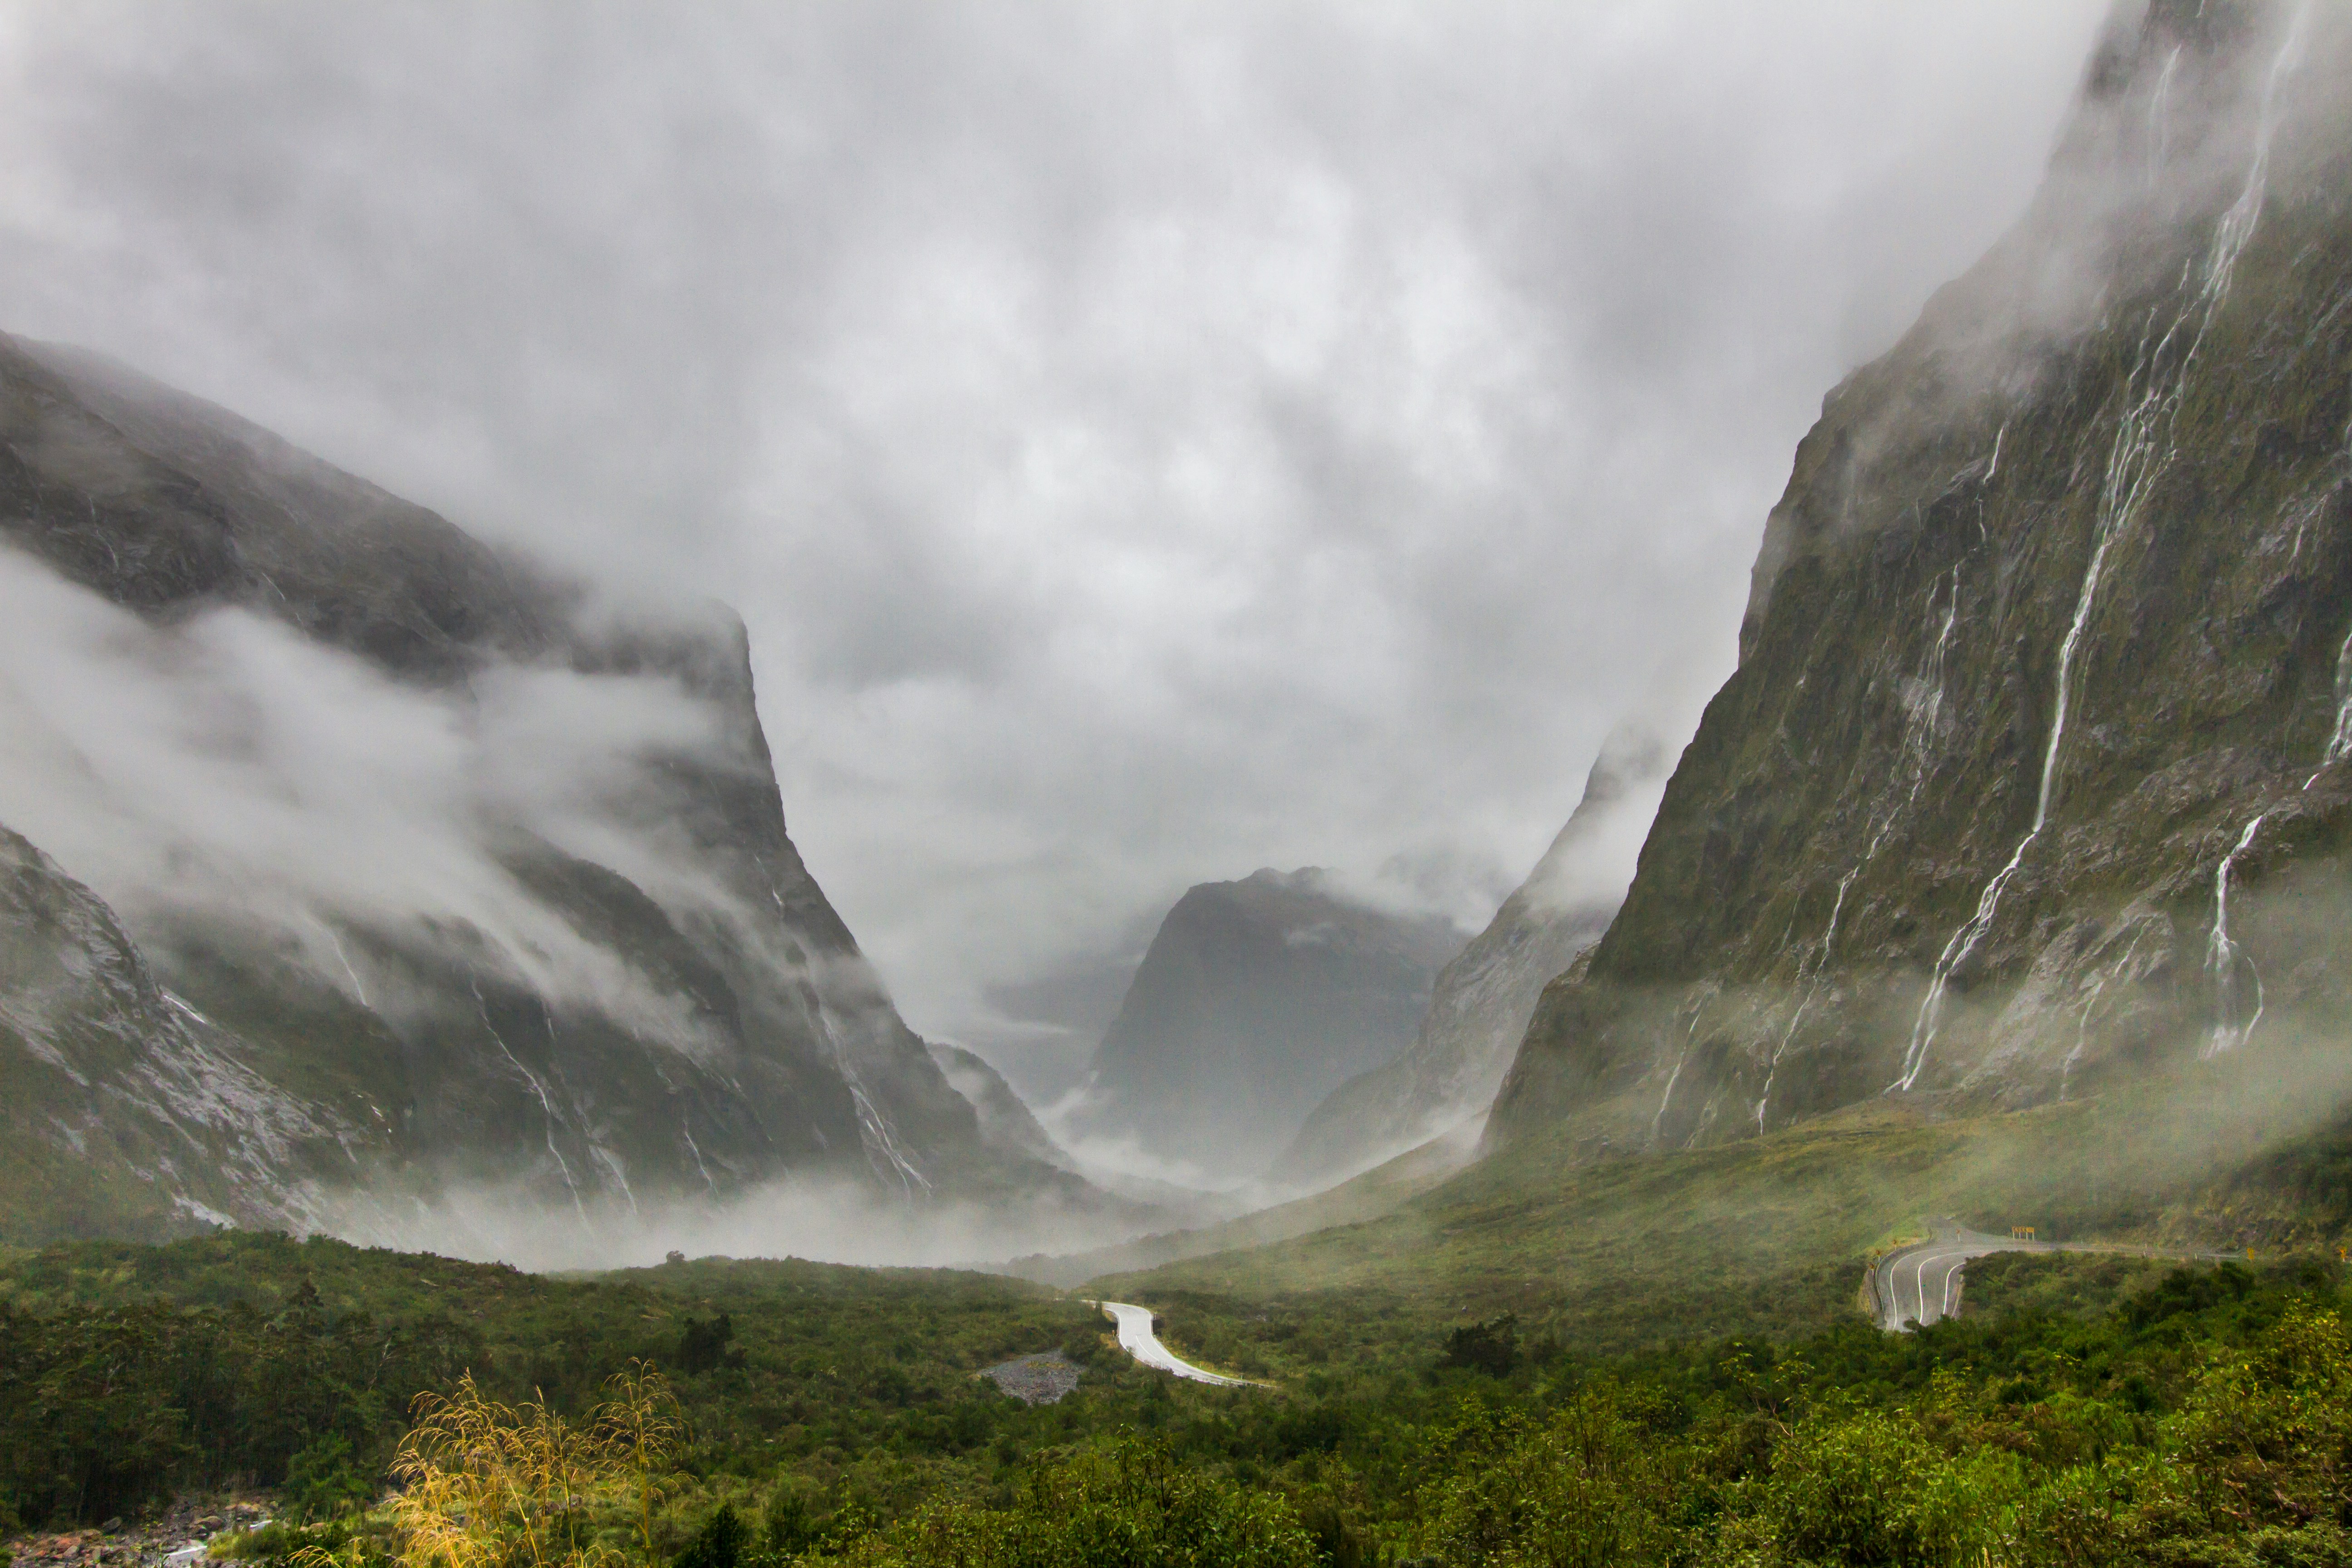 The view after exiting the Homer Tunnel on the Milford Sound end. Pic courtesy Adam Edgerton and Unsplash